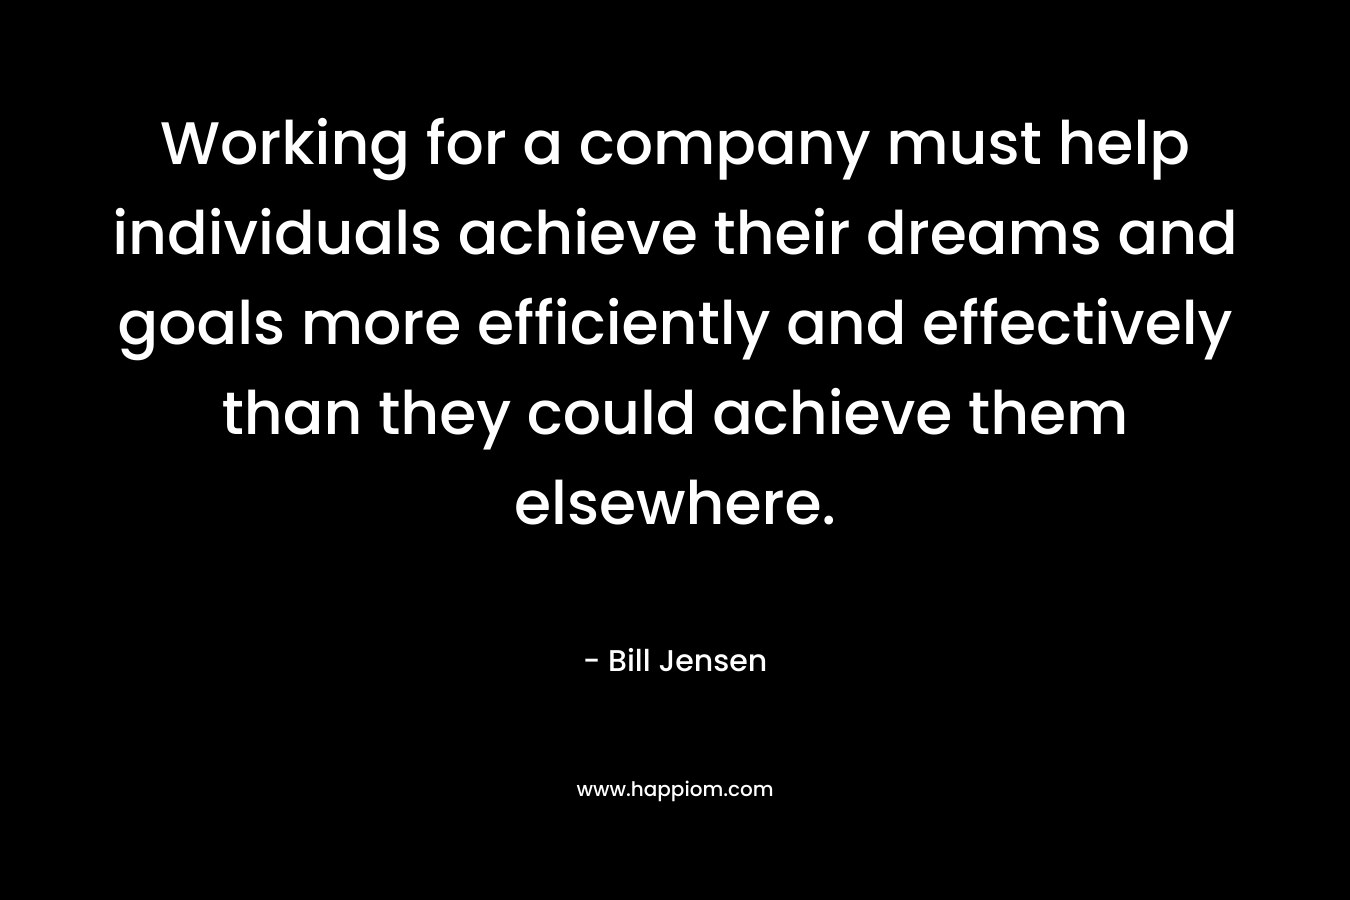 Working for a company must help individuals achieve their dreams and goals more efficiently and effectively than they could achieve them elsewhere.